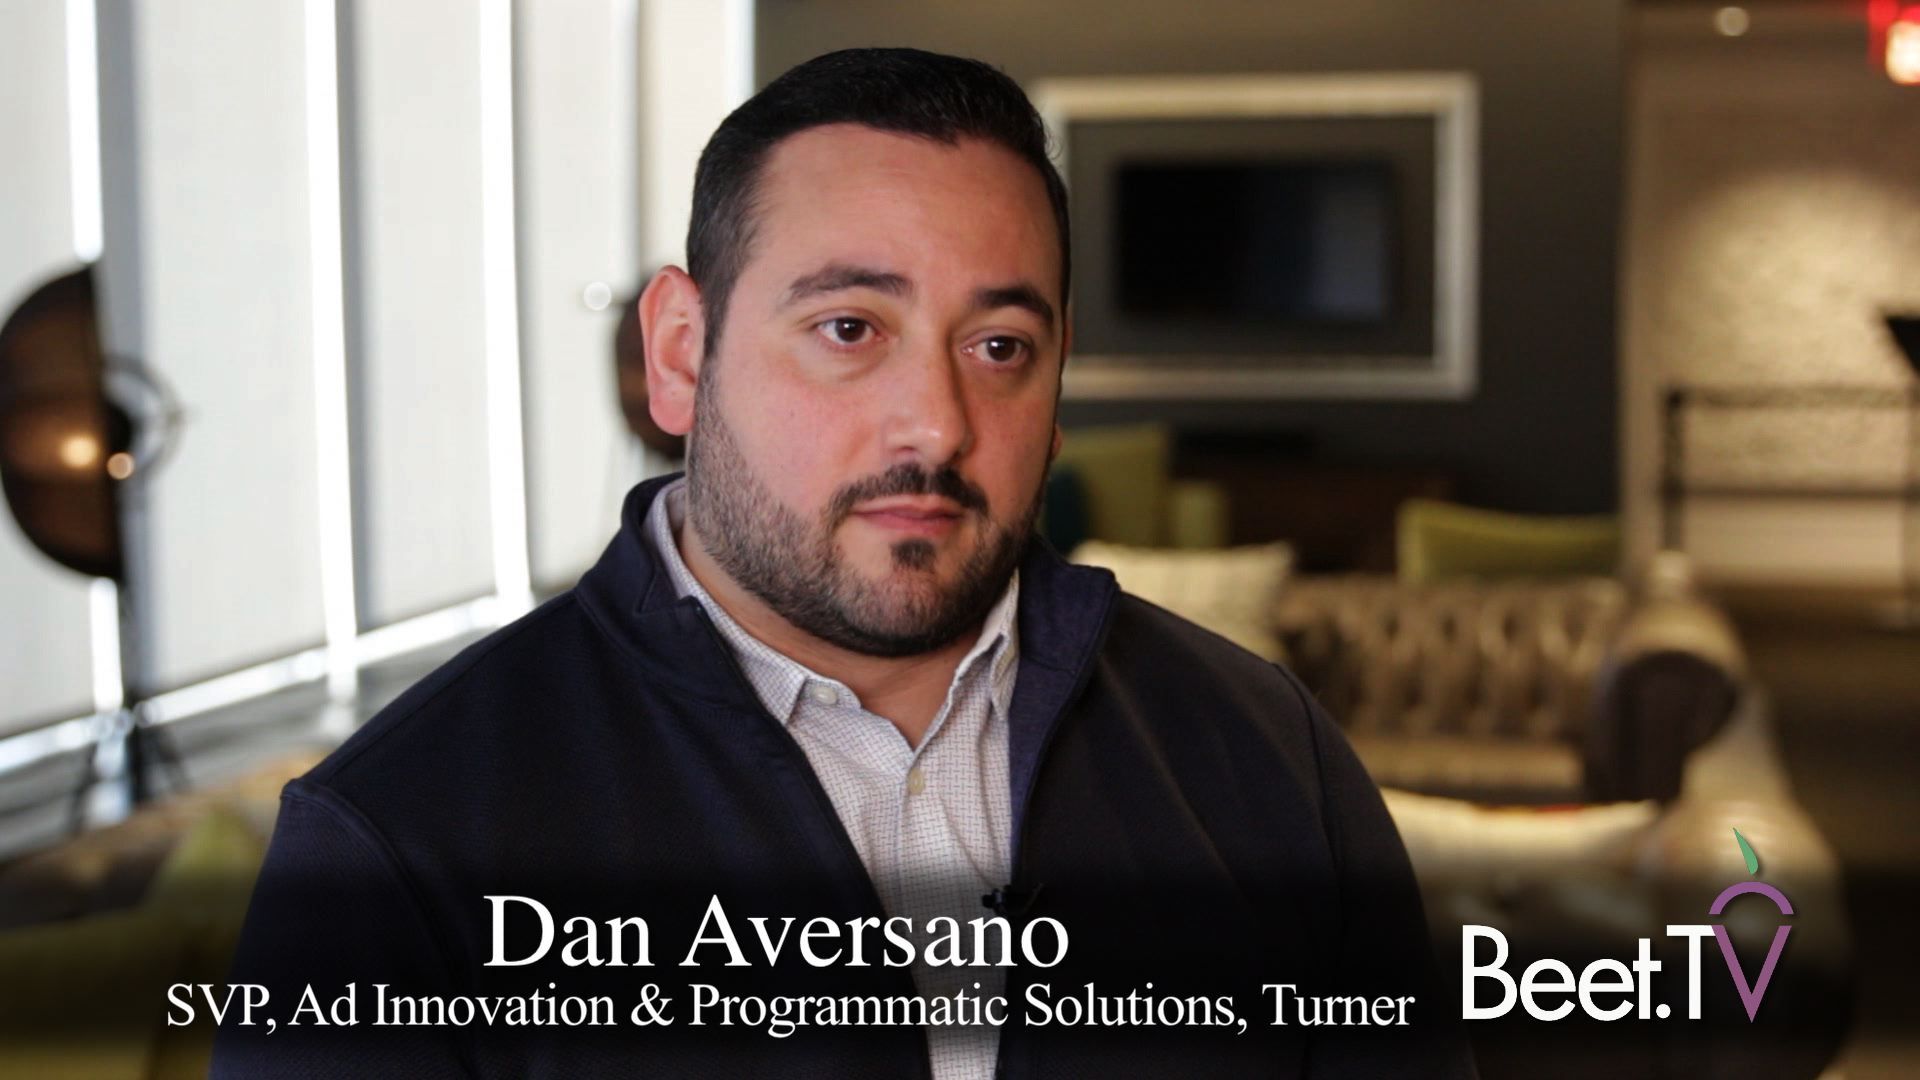 AT&T Data Helps Fuel Turner’s Quest For Guaranteed Campaign Outcomes: SVP Aversano